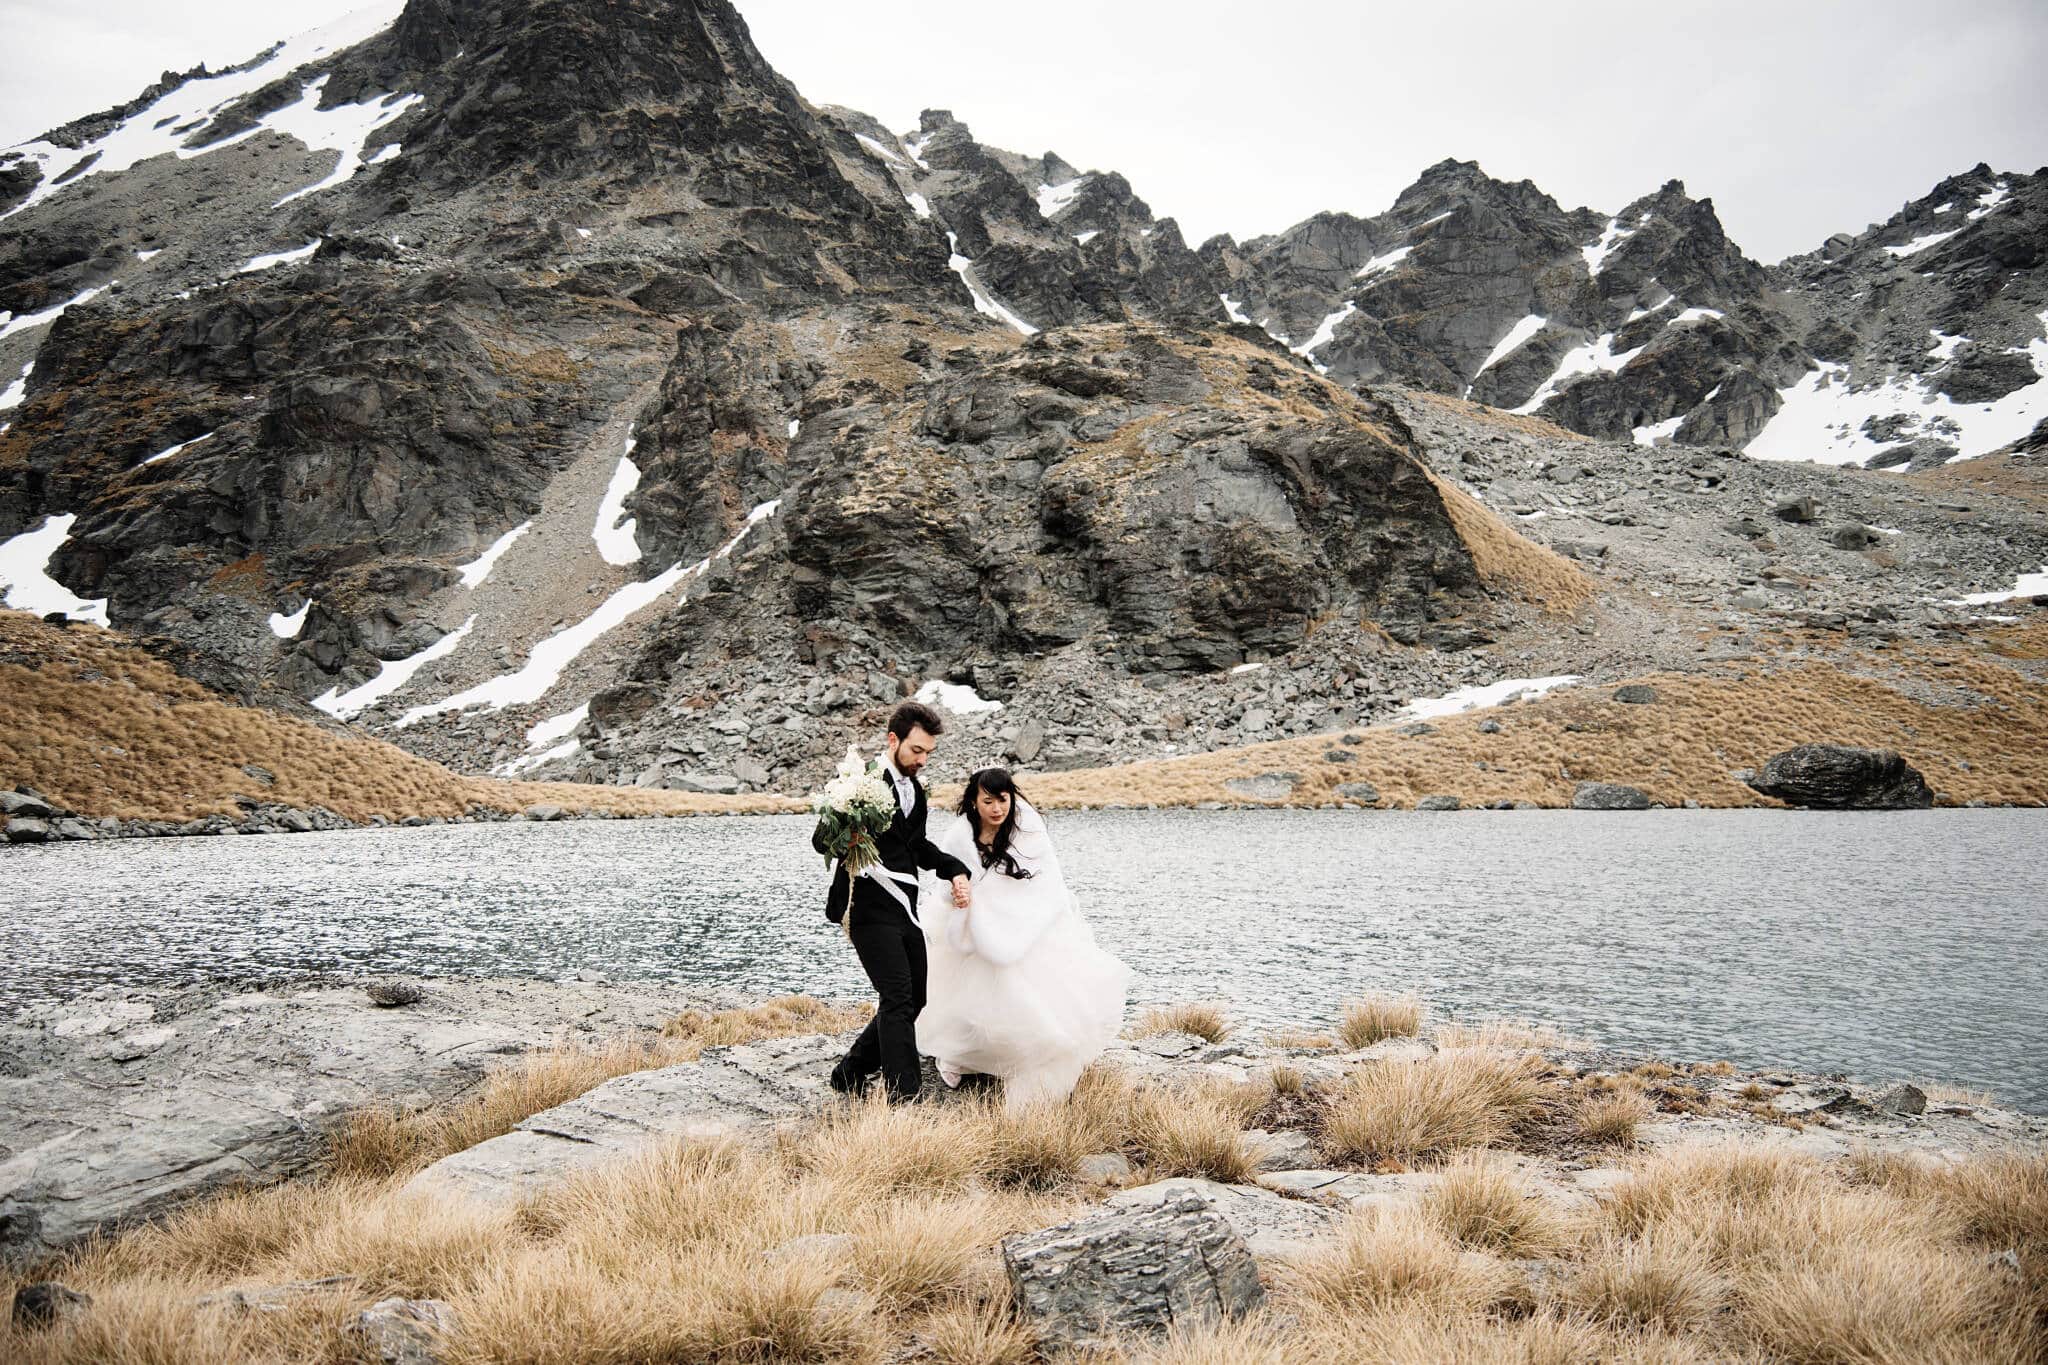 Carlos and Wanzhu's intimate wedding at Cecil Peak, with a mountain lake backdrop.